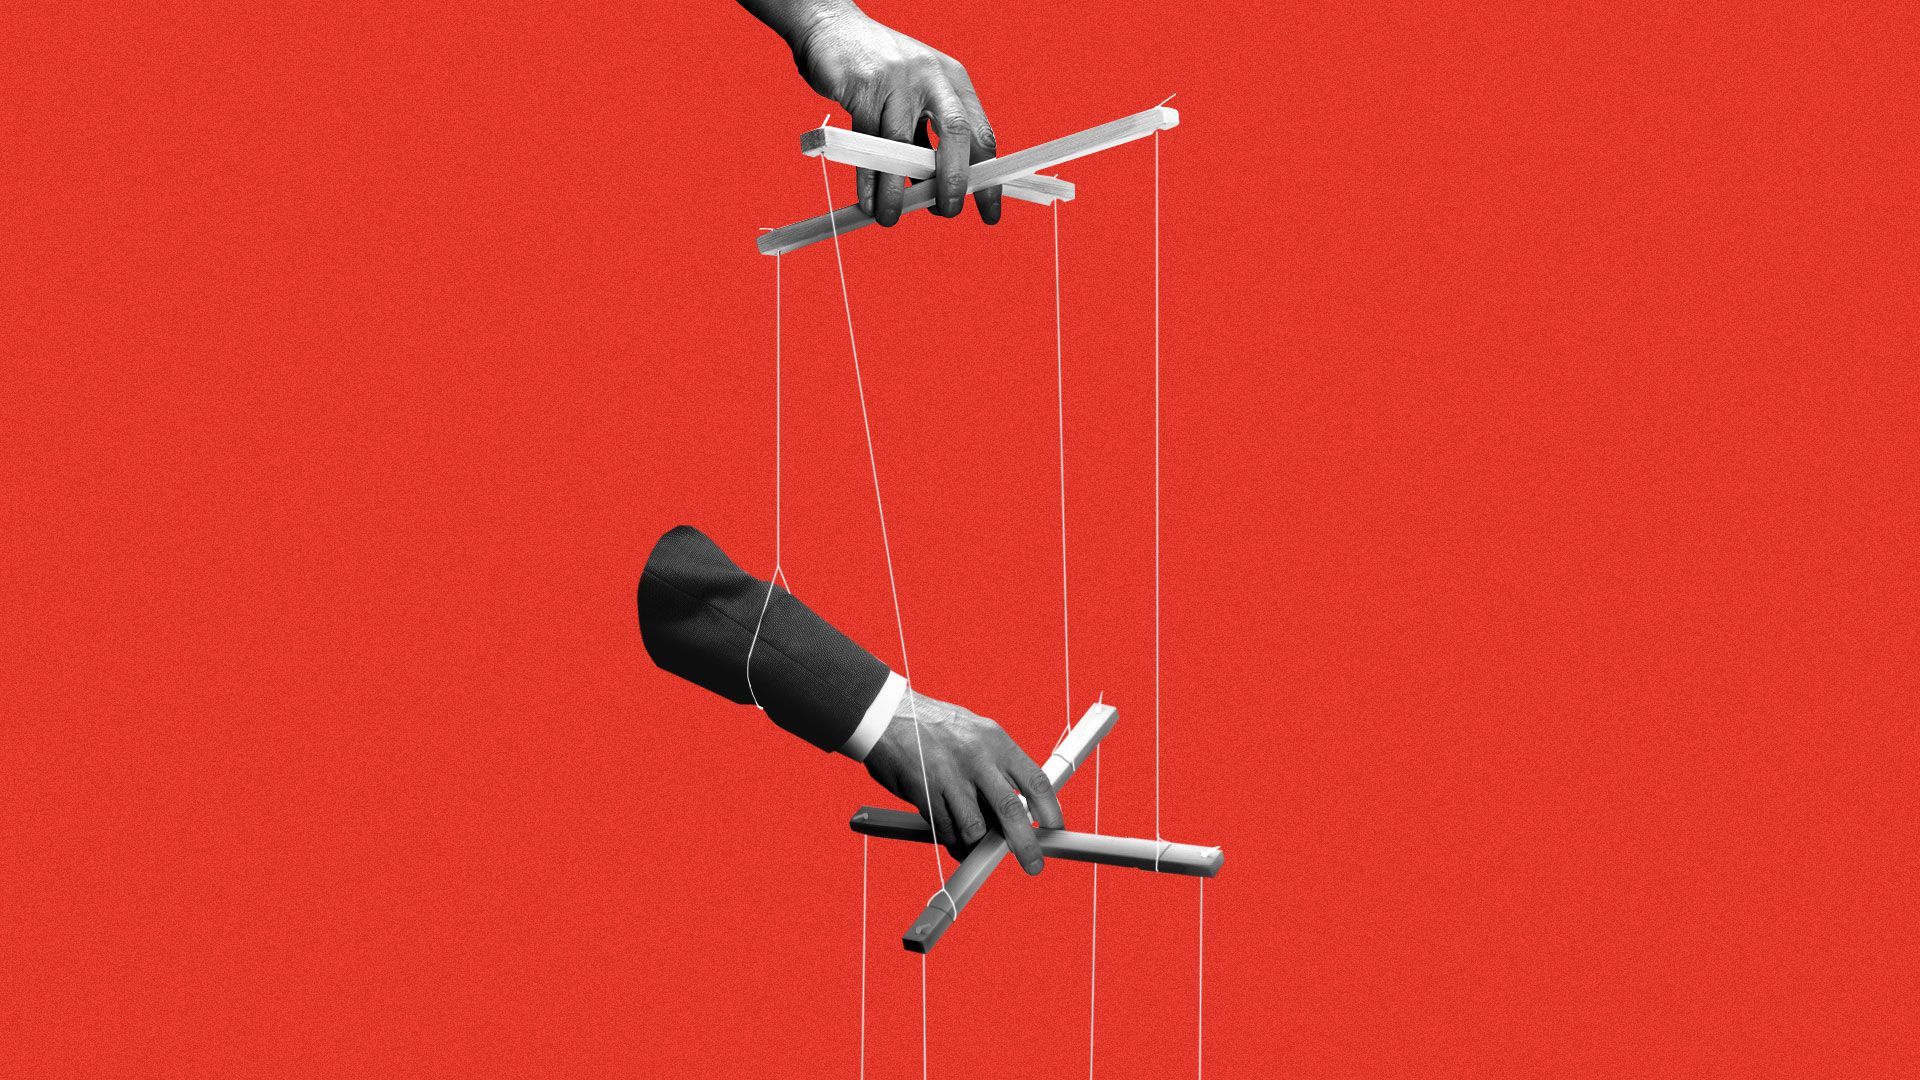 Illustration of a hand holding puppet strings controlling another hand with puppet strings.